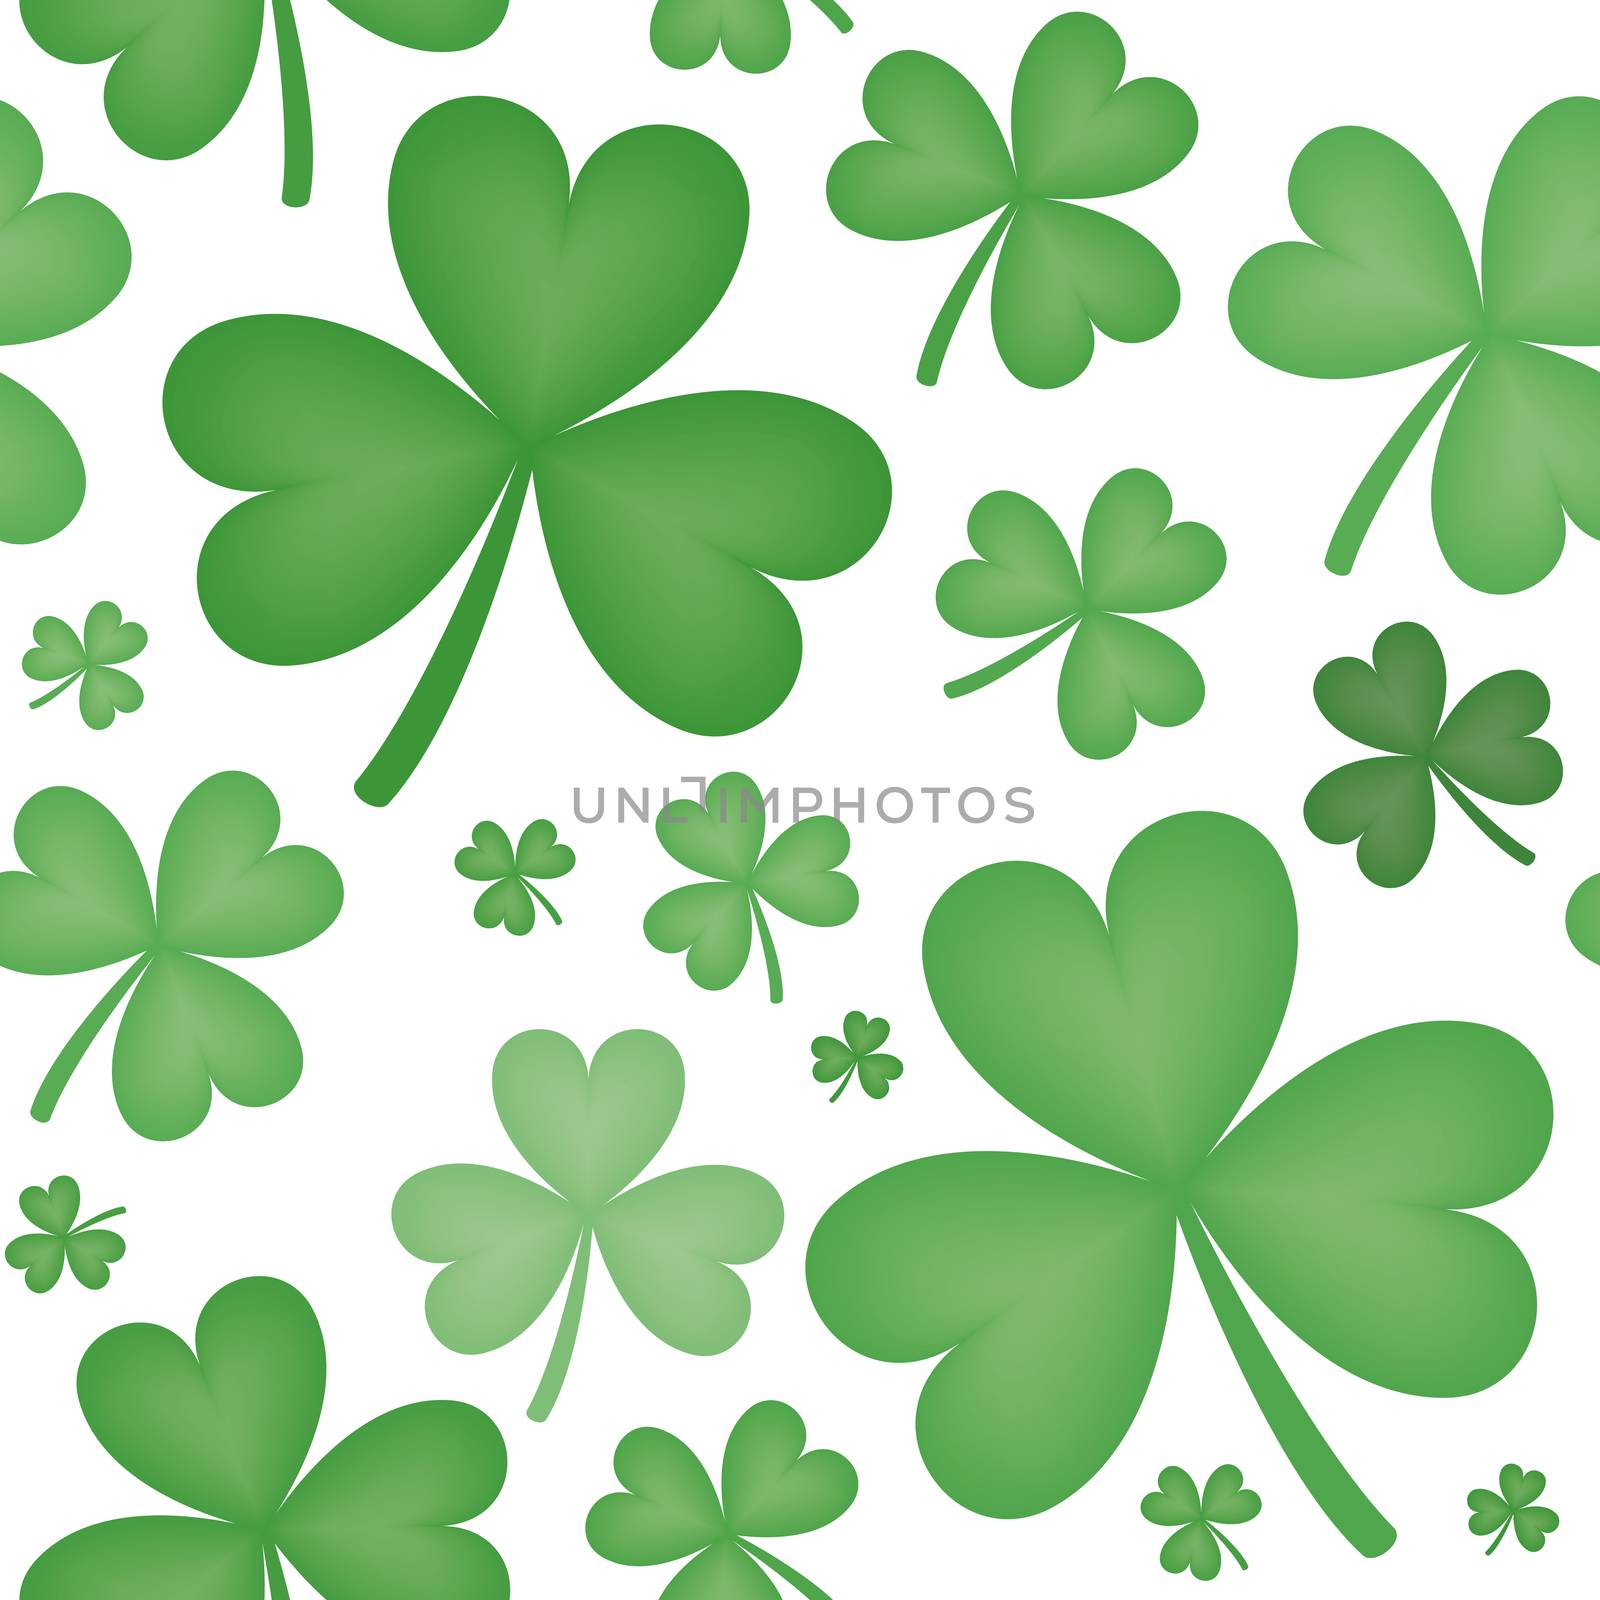 Seamless pattern of green shamrock shapes of varying sizes with white background